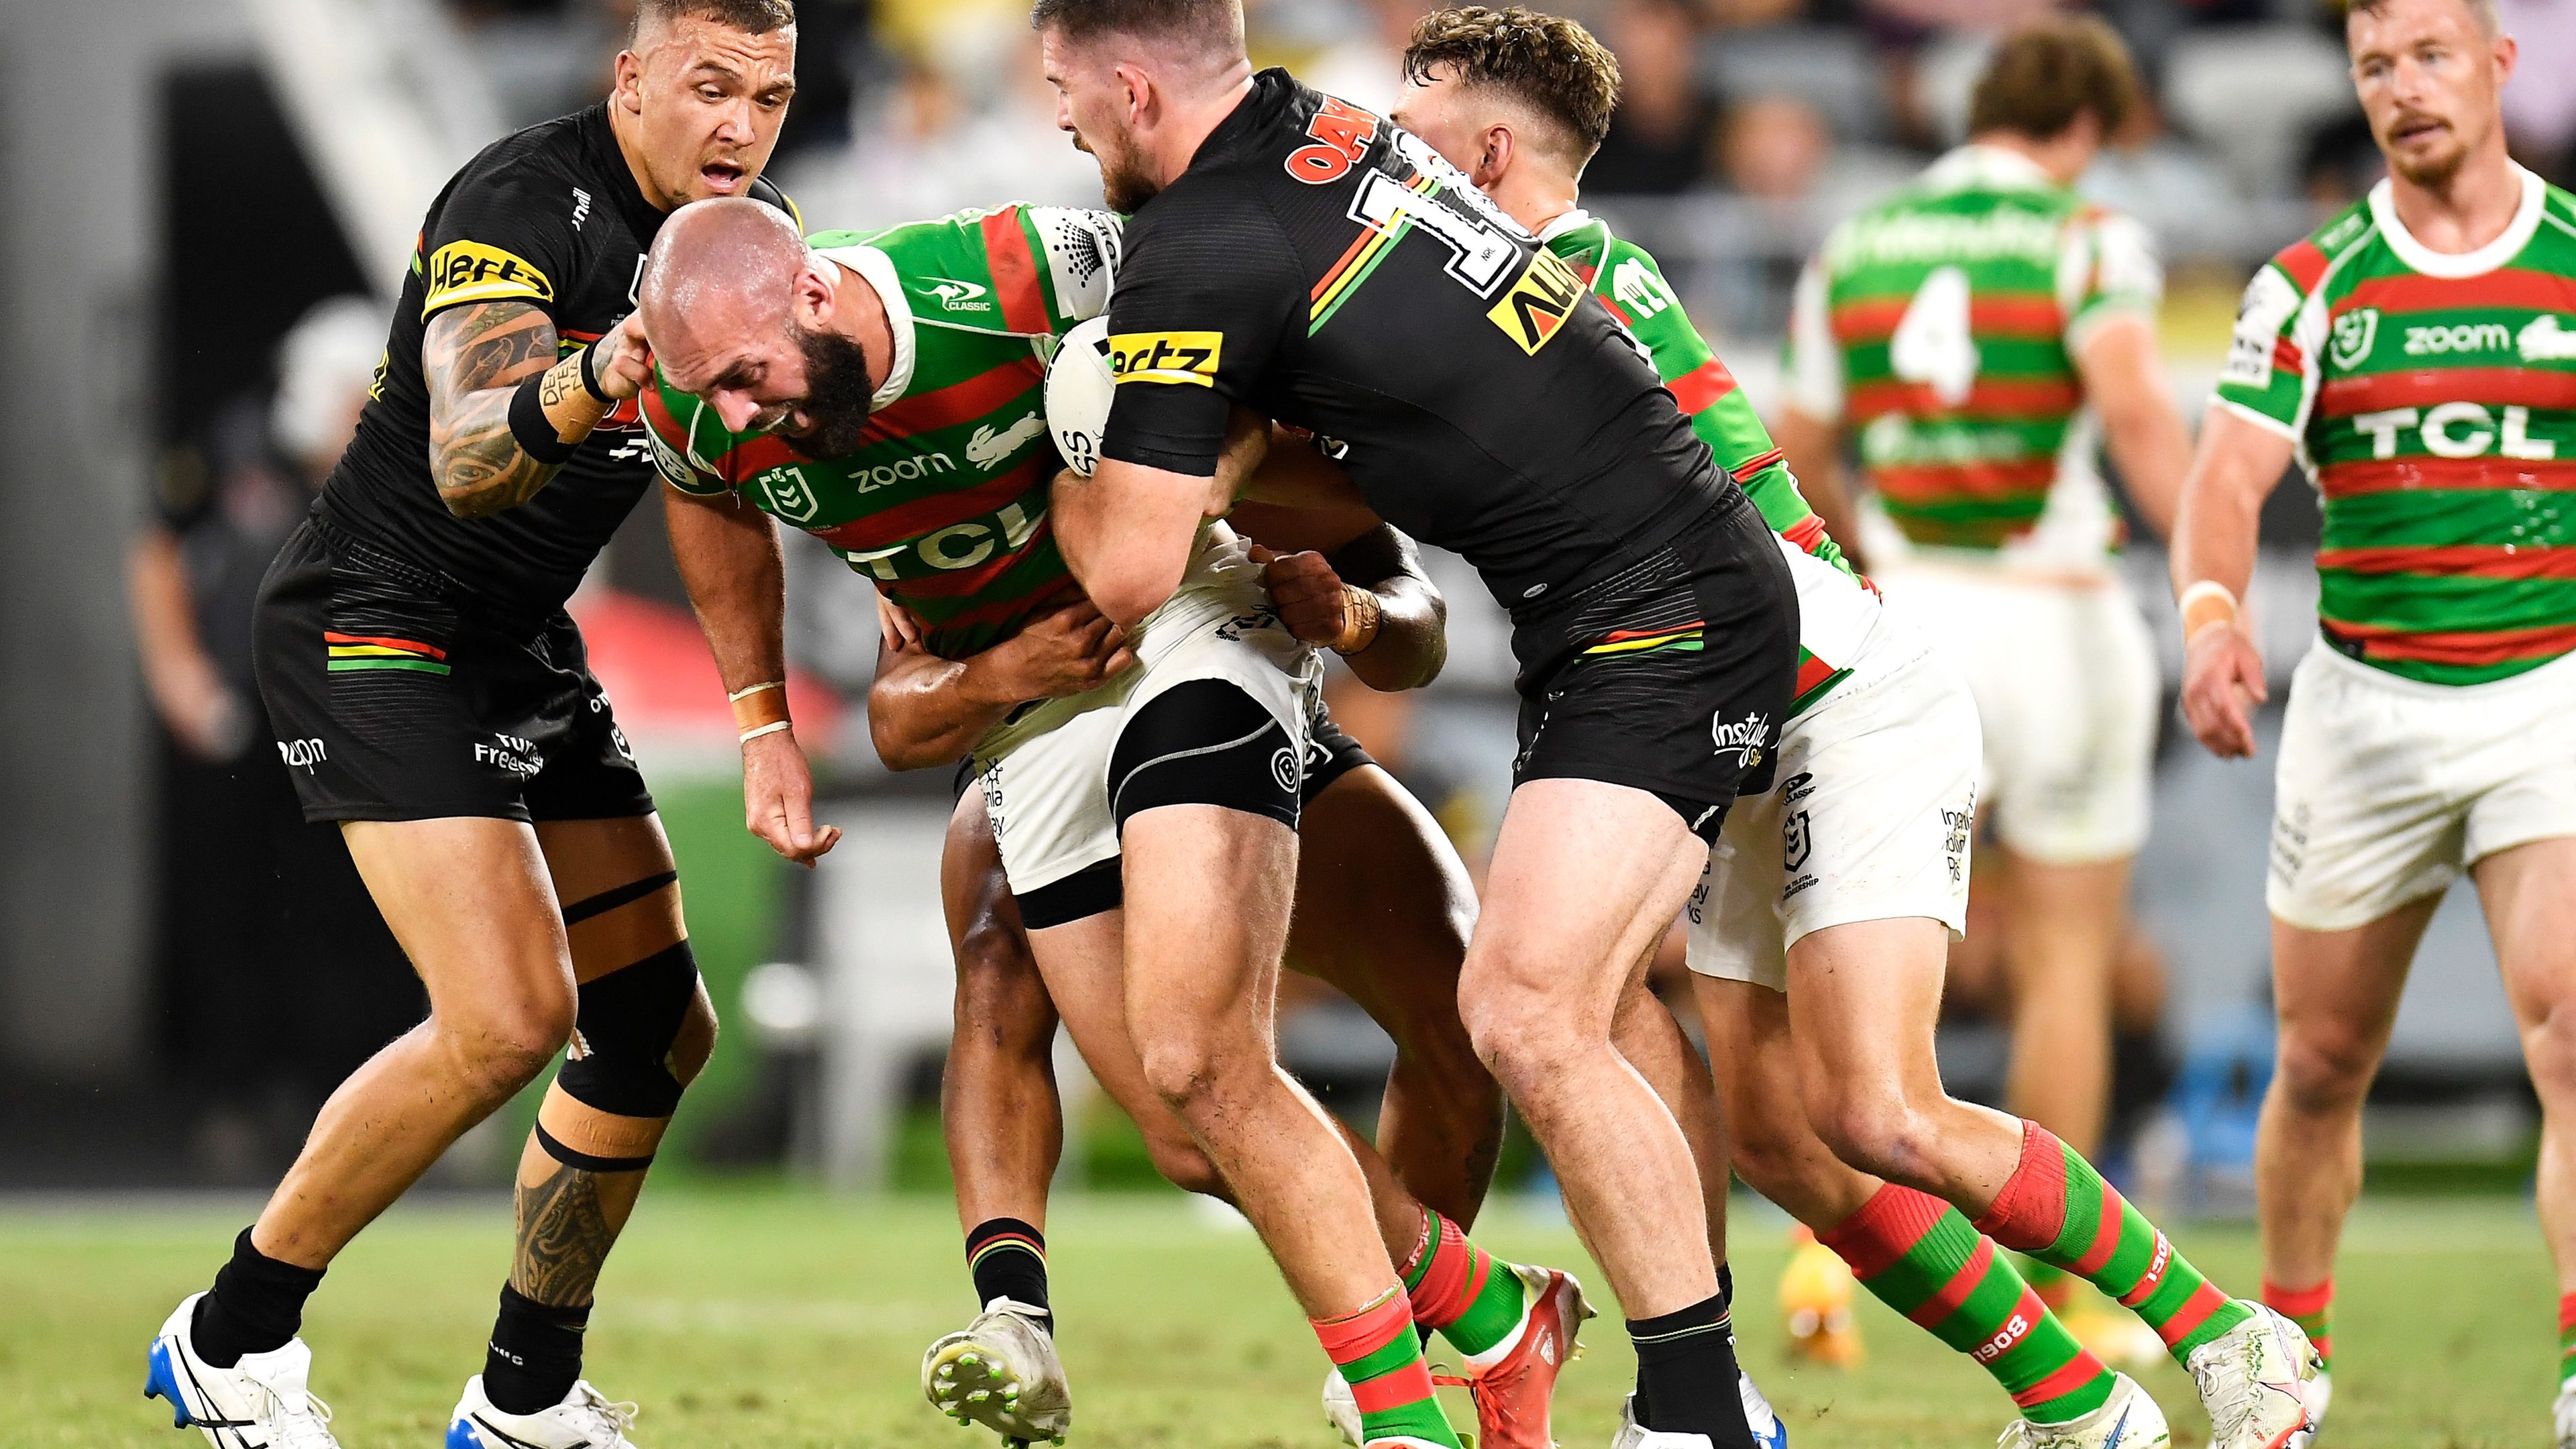 Rabbitohs revealed what changed in their approach after humbling regular season defeats to Panthers